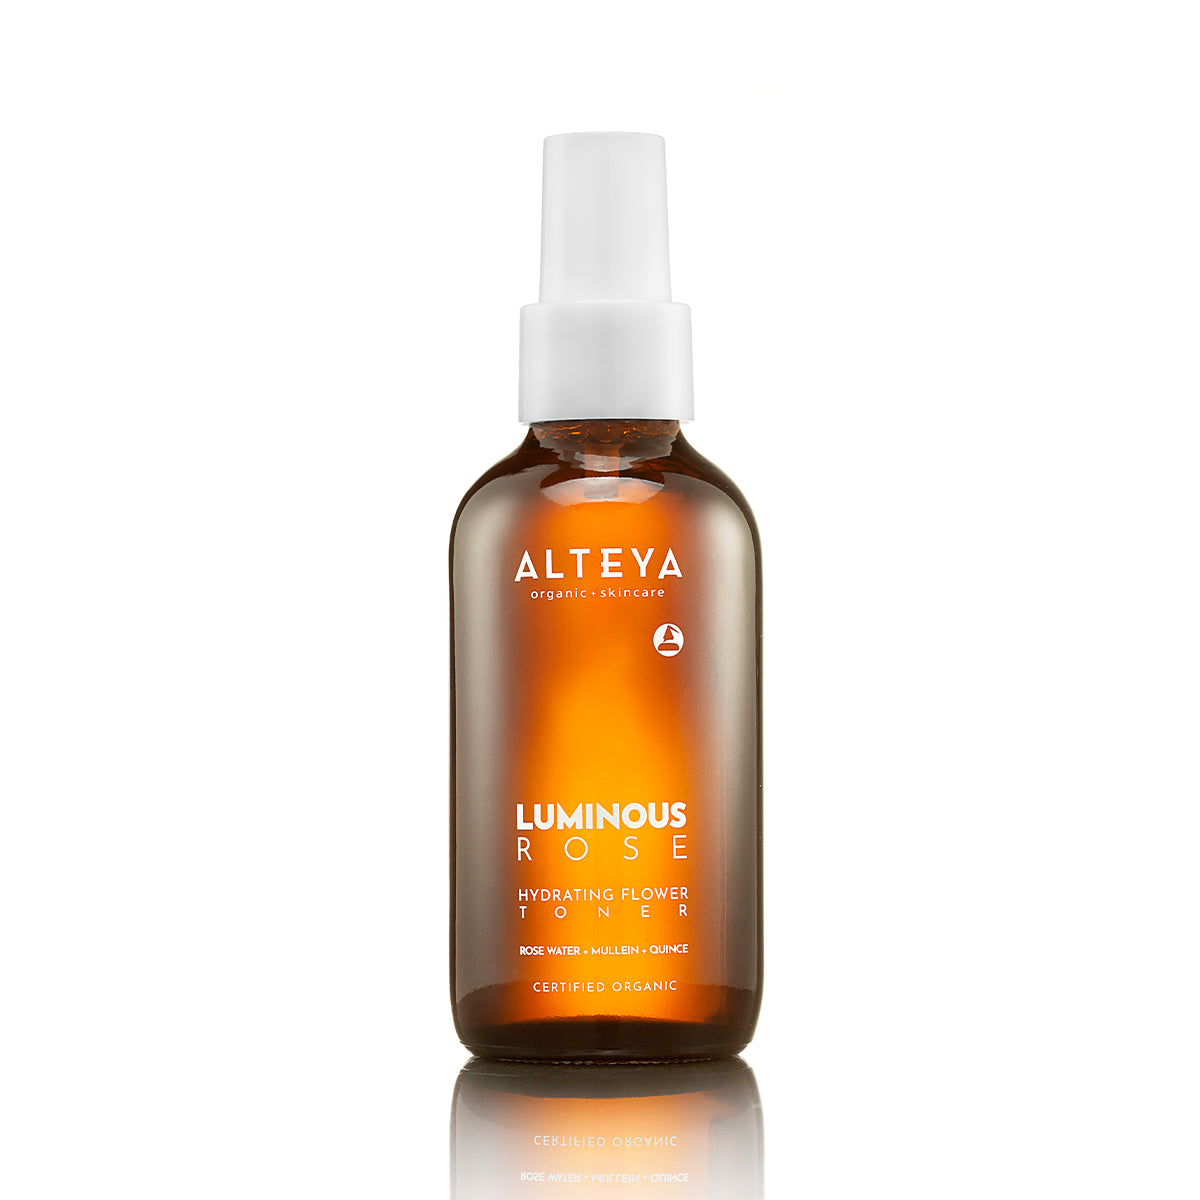 A bottle of Alteya Organics' Hydrating Flower Toner Luminous Rose helps purify and act as a gentle toner.